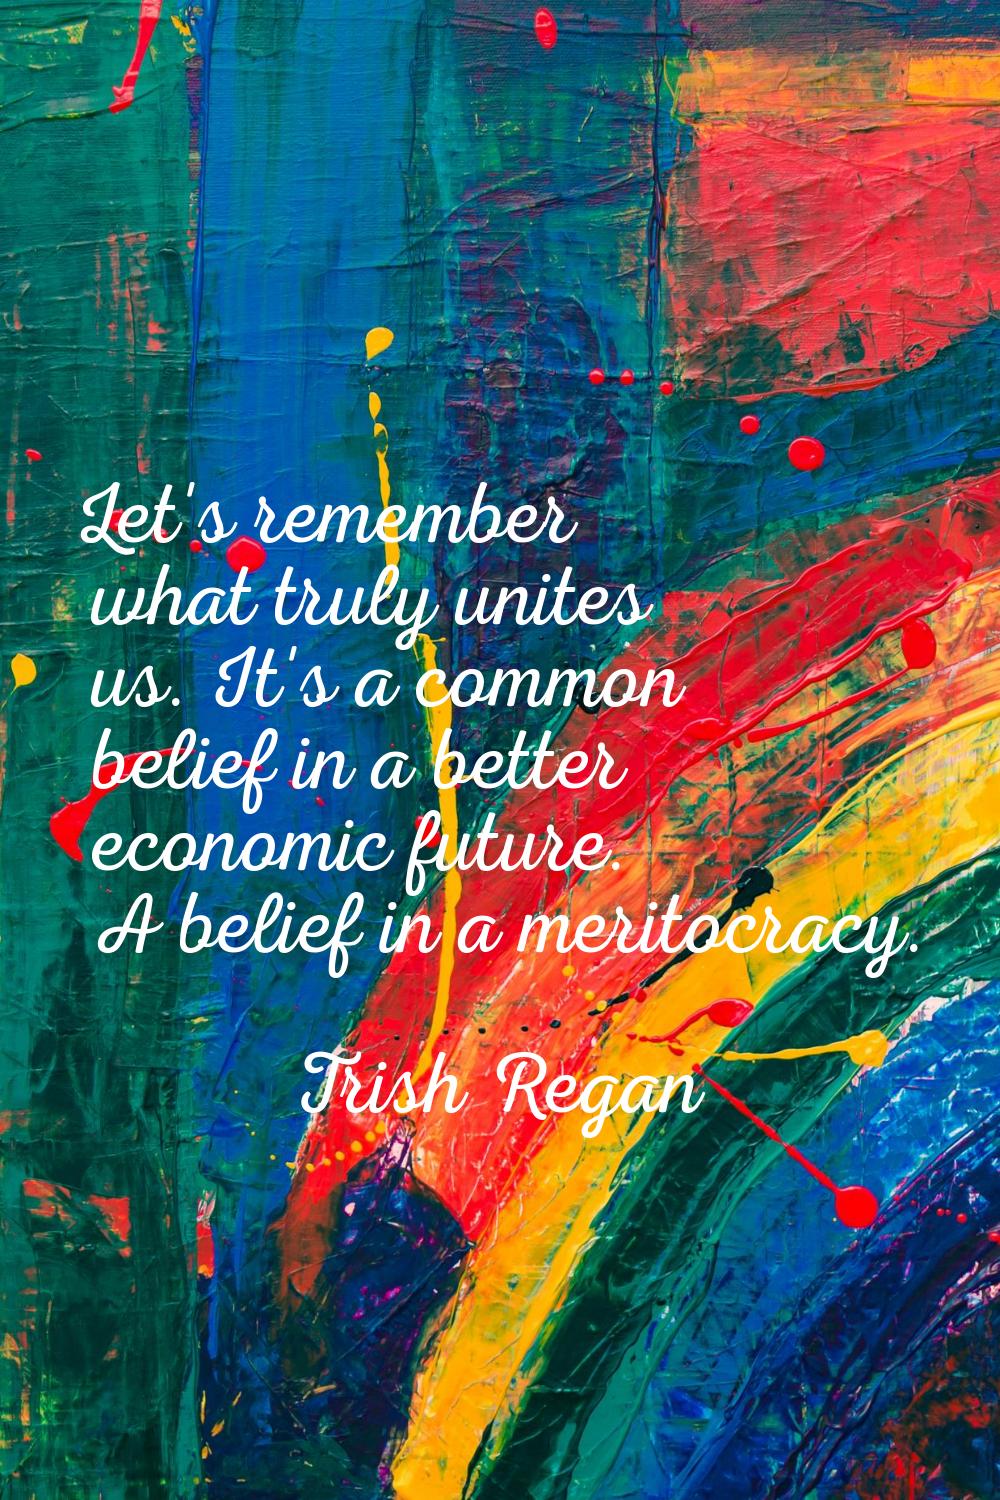 Let's remember what truly unites us. It's a common belief in a better economic future. A belief in 